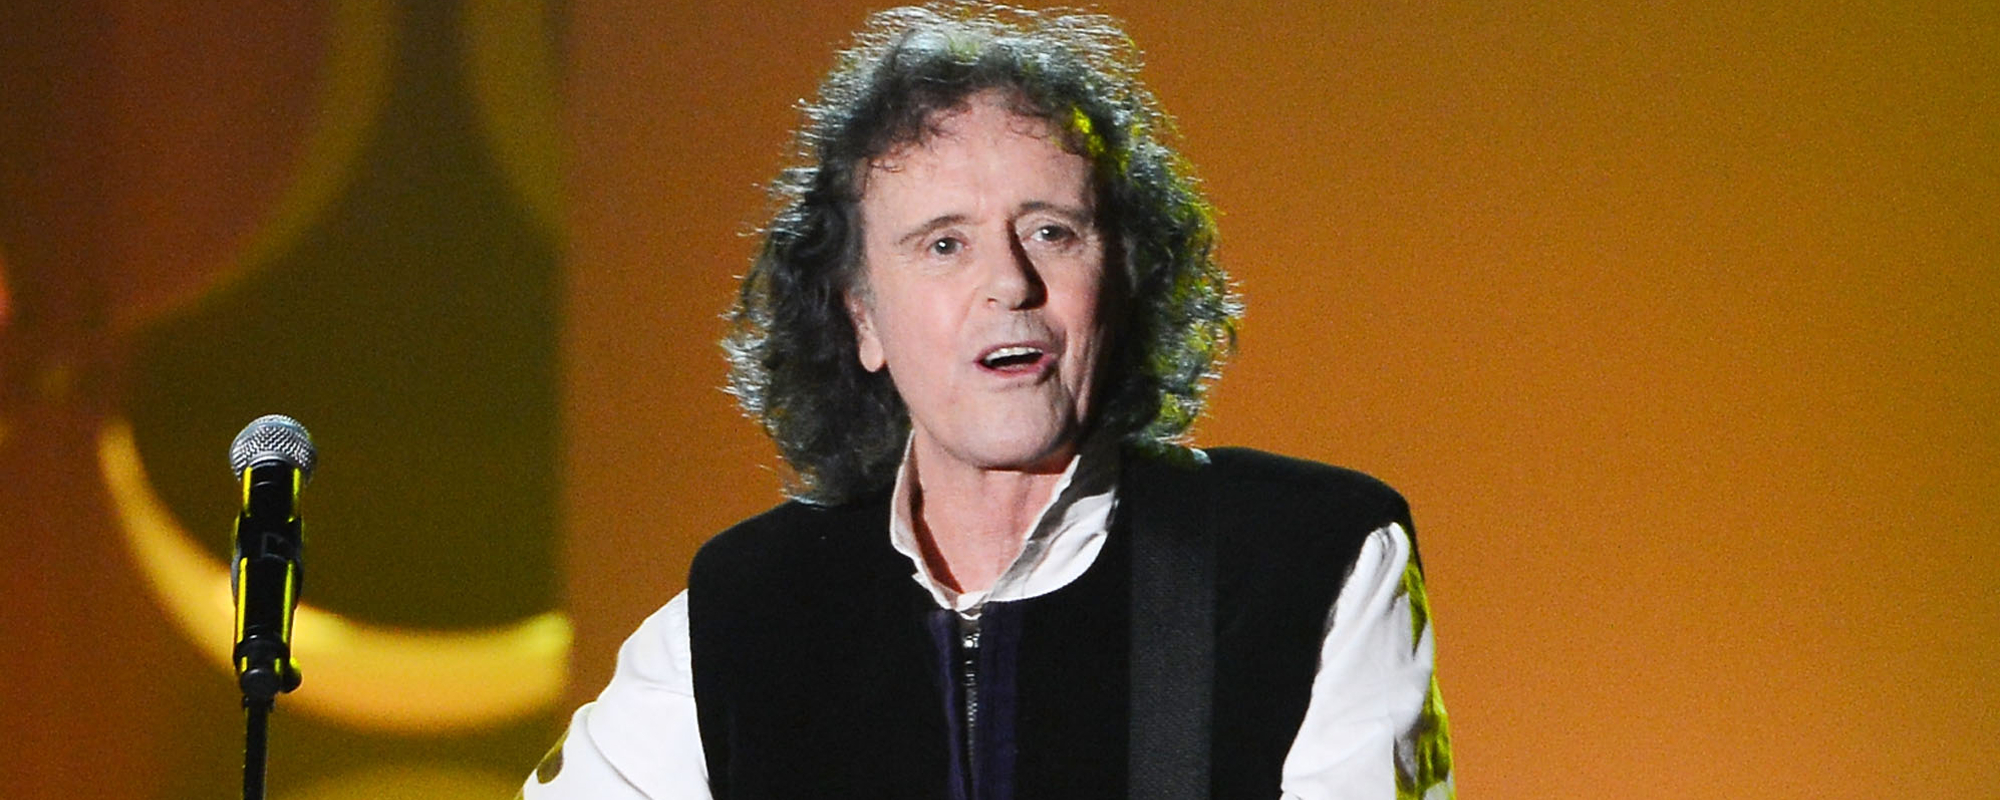 Donovan Talks Downside of Fame and Mentoring George Harrison: “He Was in the Shadow of John and Paul”